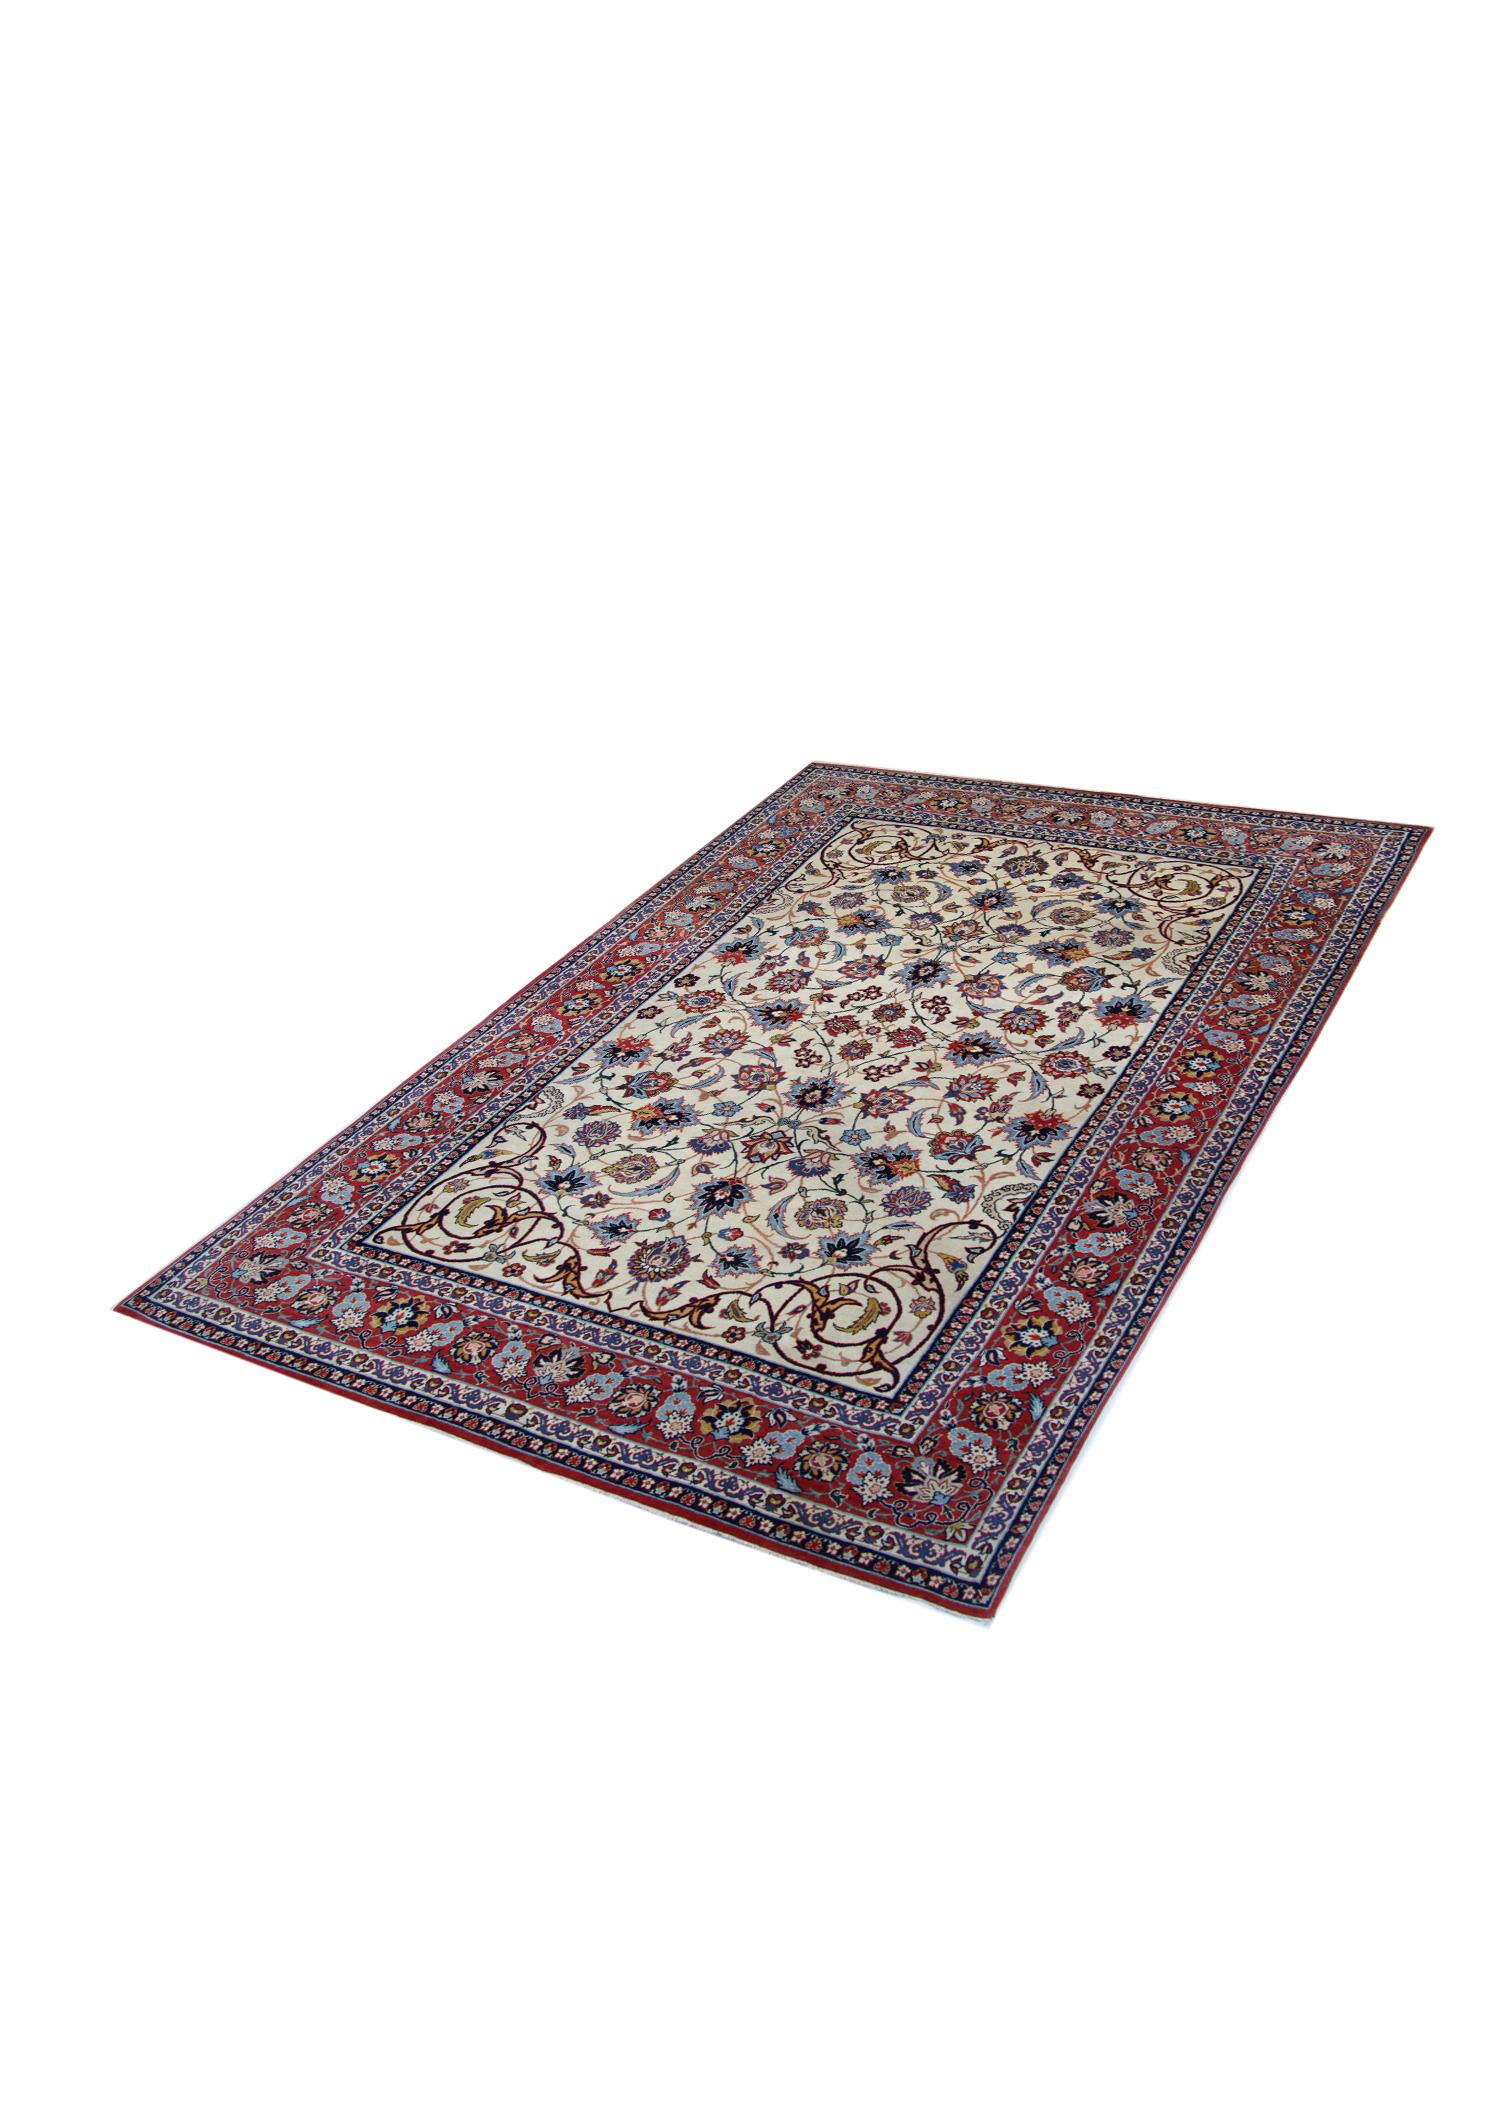 Arts and Crafts Vintage Rugs Floral Kurk Handwoven Oriental Blue Red Cream Carpet Rug 206x139cm  For Sale